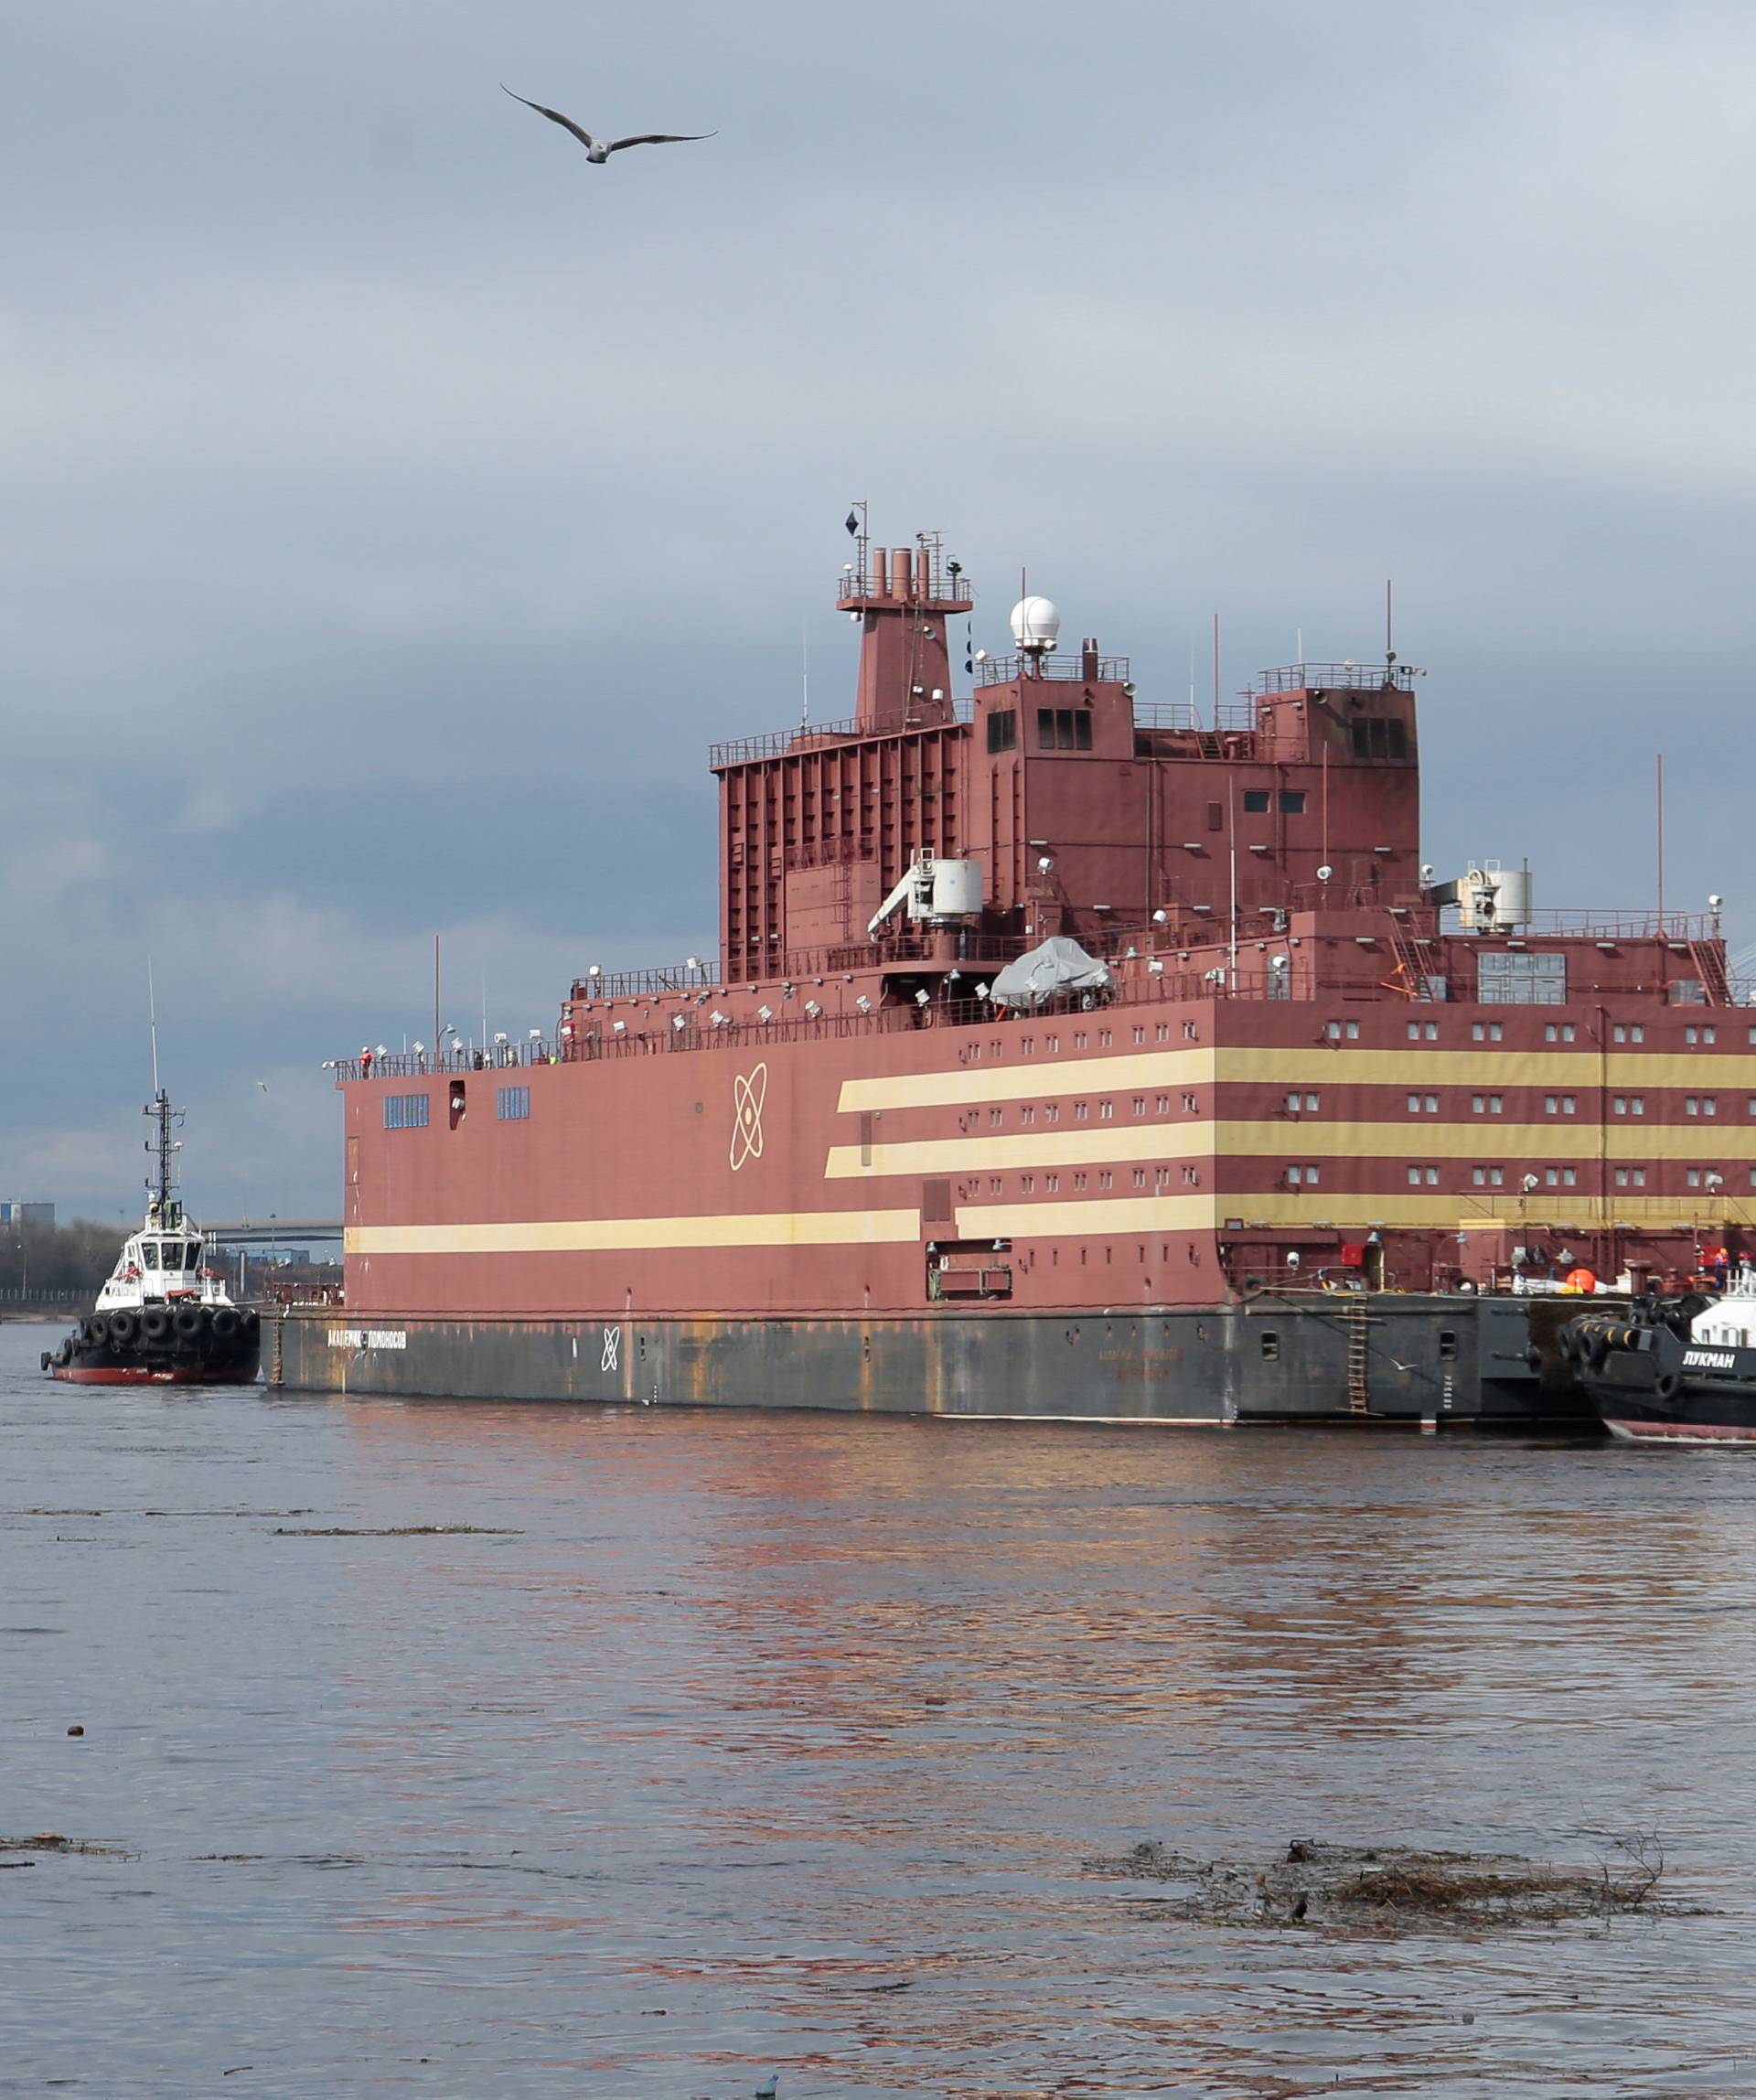 The floating nuclear power plant "Akademik Lomonosov" is seen being towed to Murmansk for nuclear fuel loading, in St. Petersburg